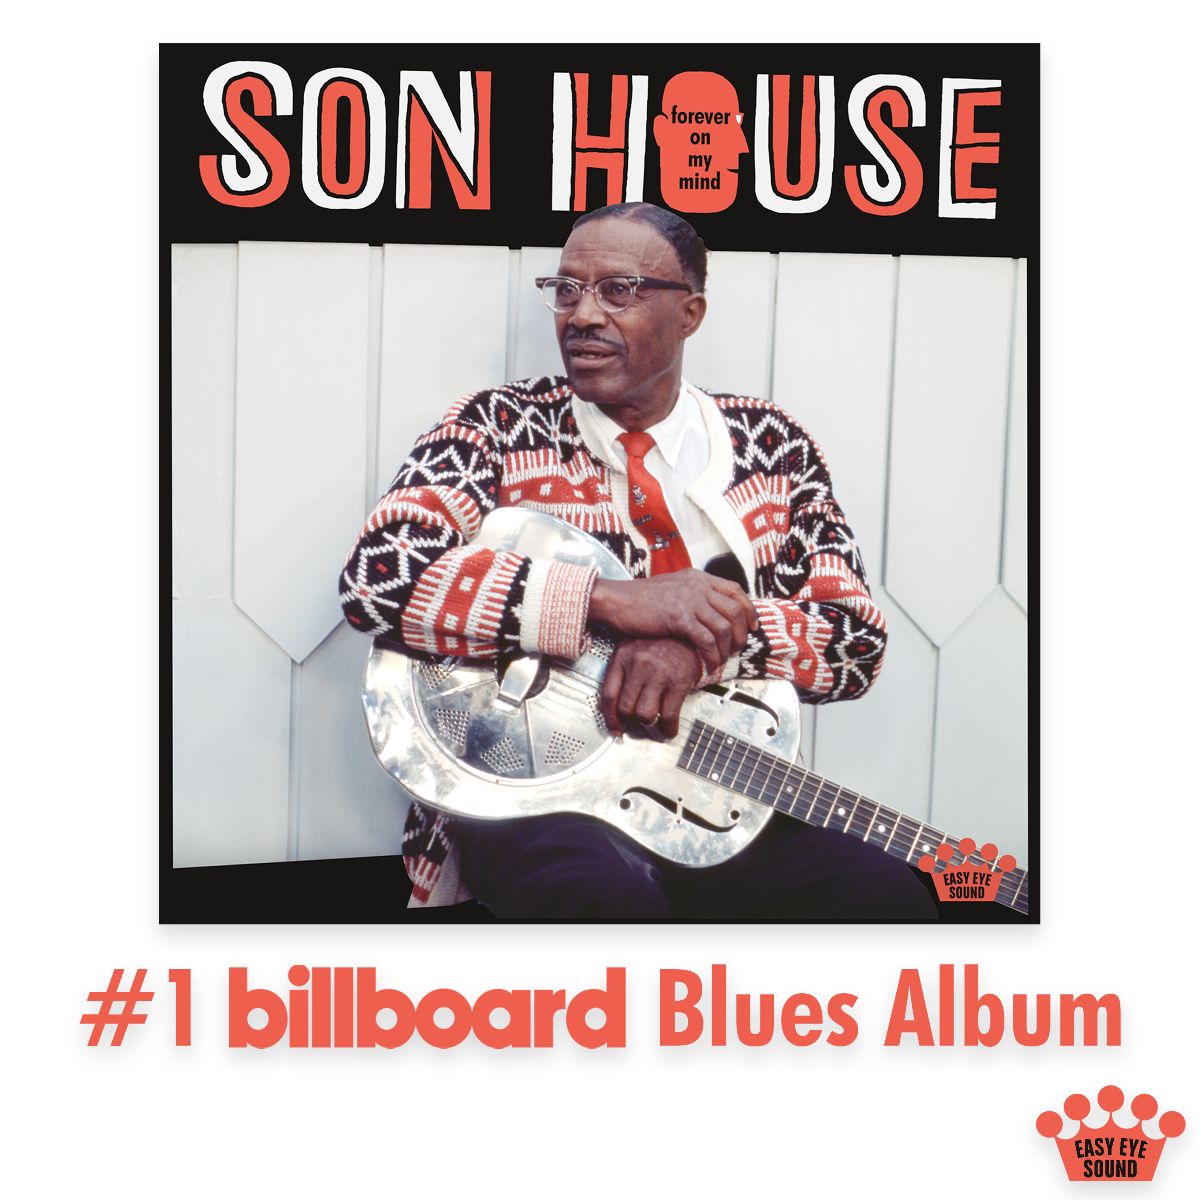 Son House "Forever On My Mind" is #1 Billboard Blues Album This Week